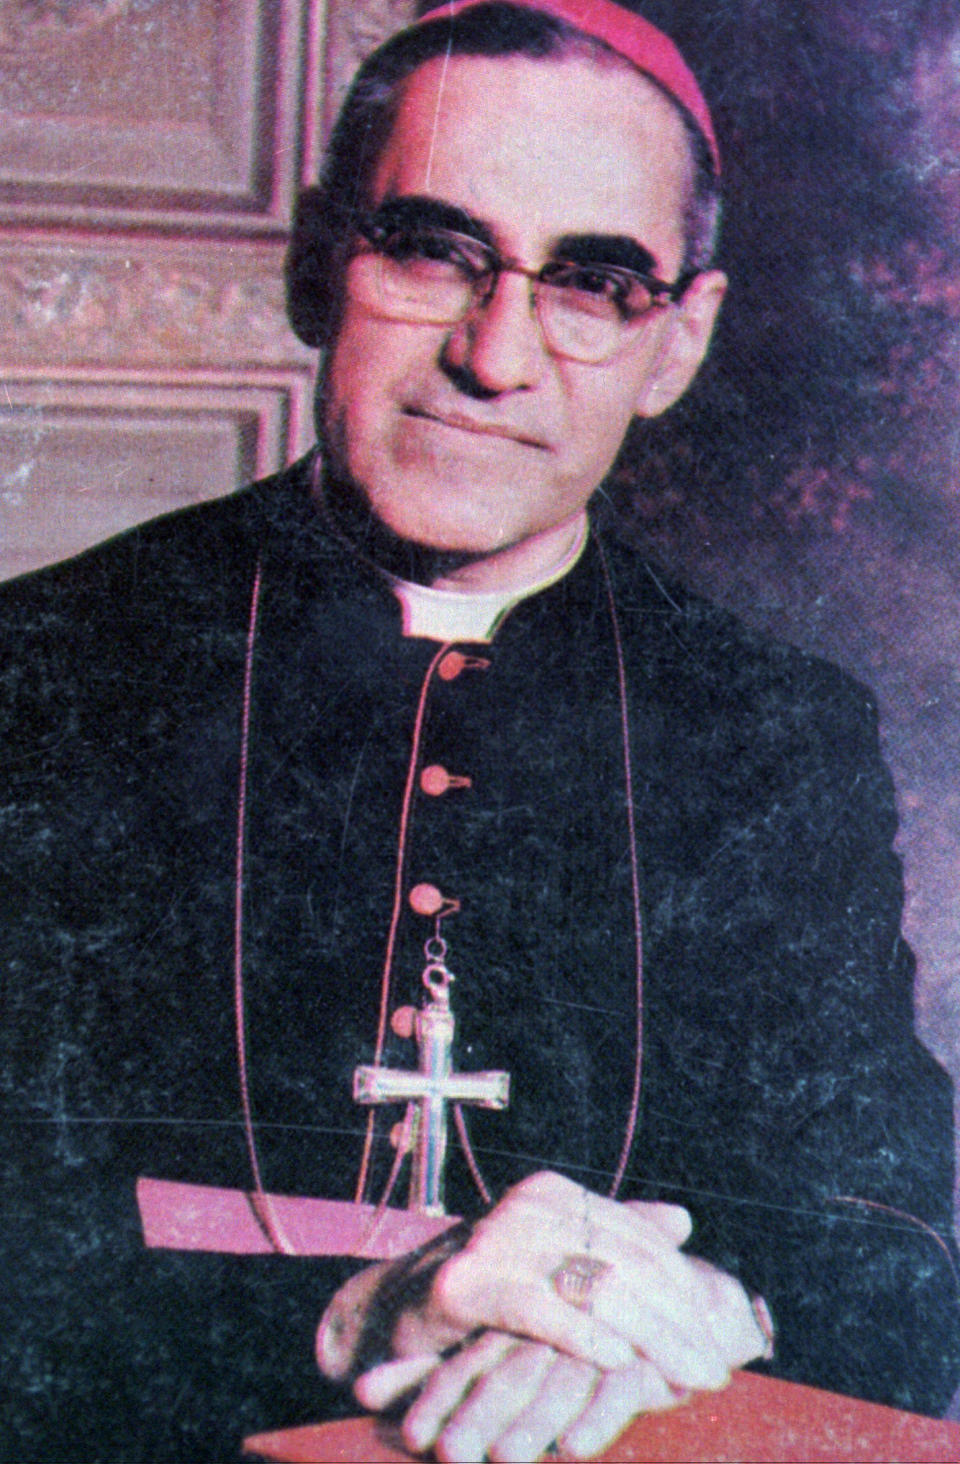 FILE - This undated file photo shows Archbishop Oscar Arnulfo Romero, who was gunned down while giving Mass in a San Salvador church on March 24, 1980. Pope Francis will canonize two of the most important and contested figures of the 20th-century Catholic Church, declaring Pope Paul VI and the martyred Salvadoran Archbishop Oscar Romero as models of saintliness for the faithful today. Sunday's ceremony is likely to be emotional for Francis, since he was greatly influenced by both men and privately told confidantes he wanted them made saints during his papacy. (AP Photo, File)